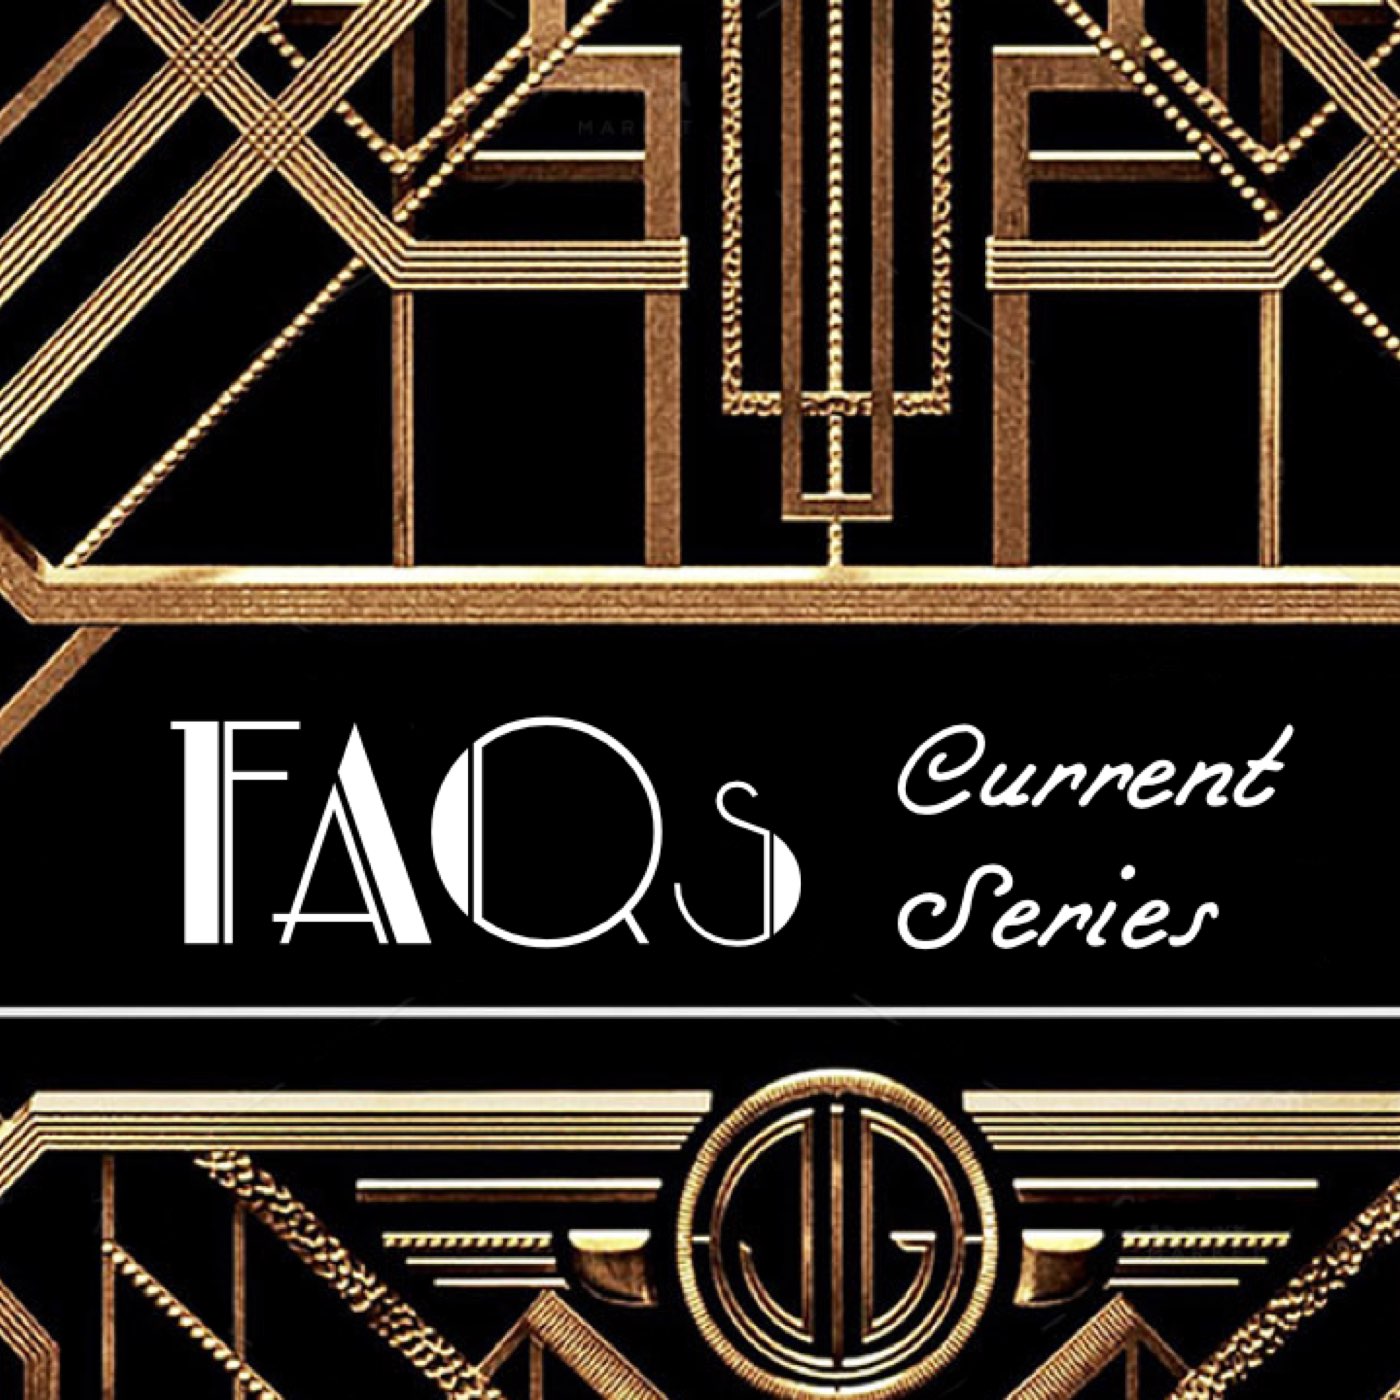 FAQ's Series- What do you think?